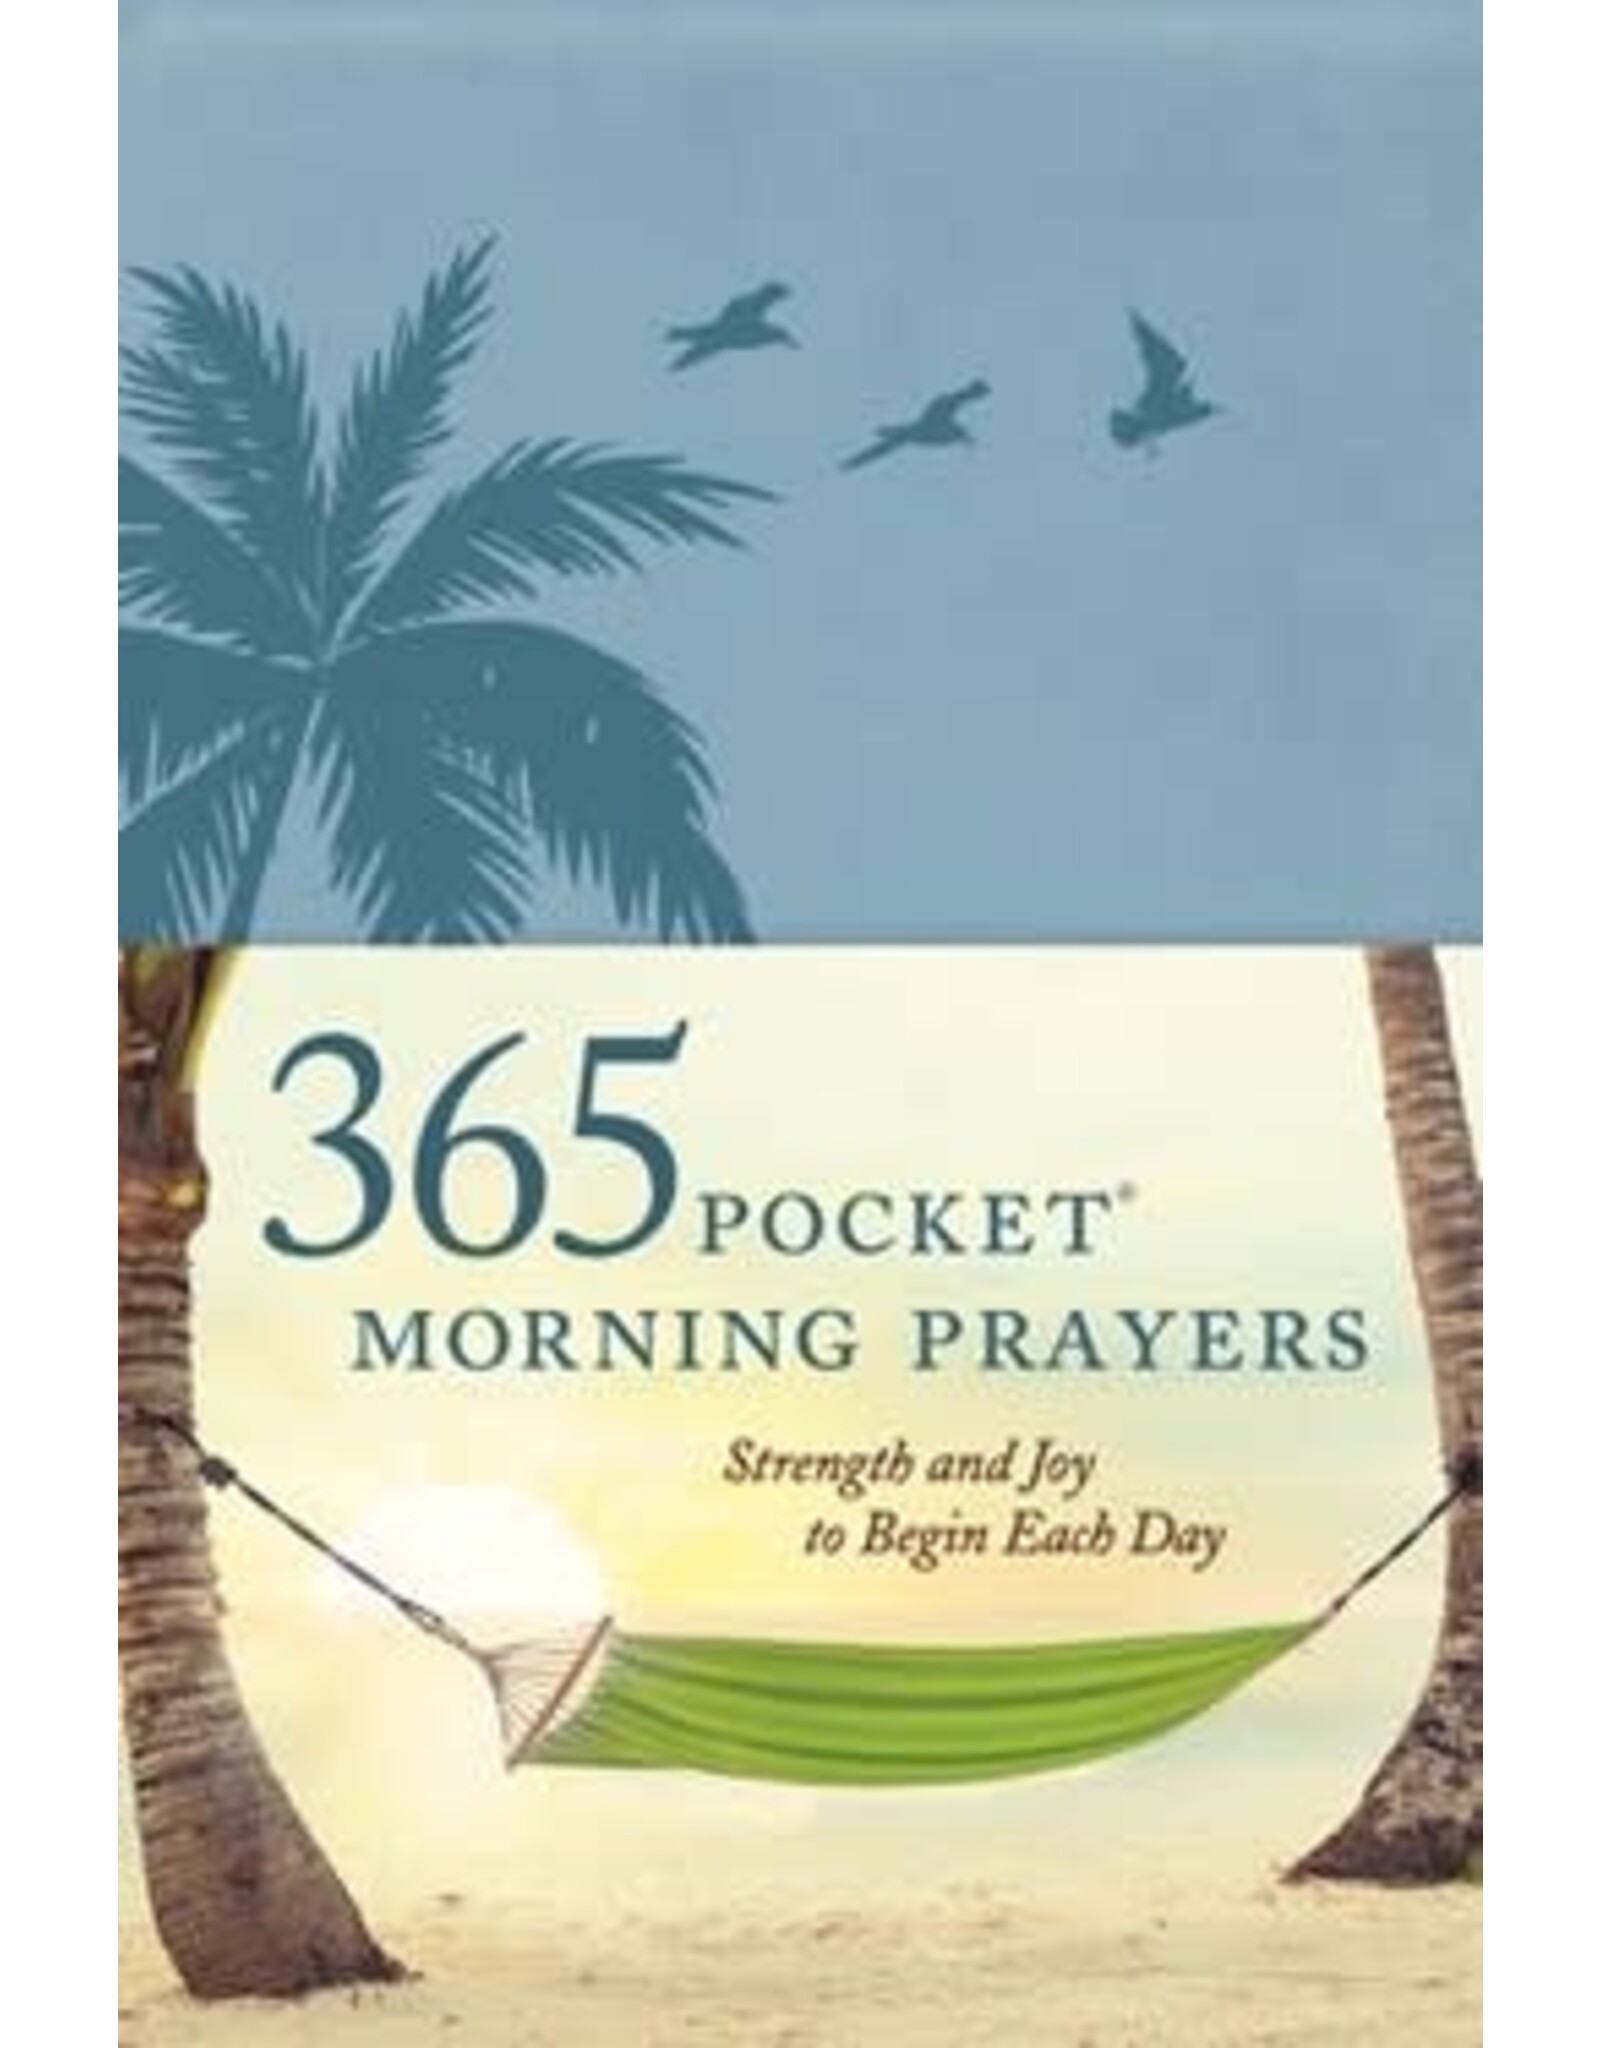 365 Pocket Morning Prayers Strength and Joy to Begin Each Day by David R. Veerman and The Barton-Veerman Co. Leather Like